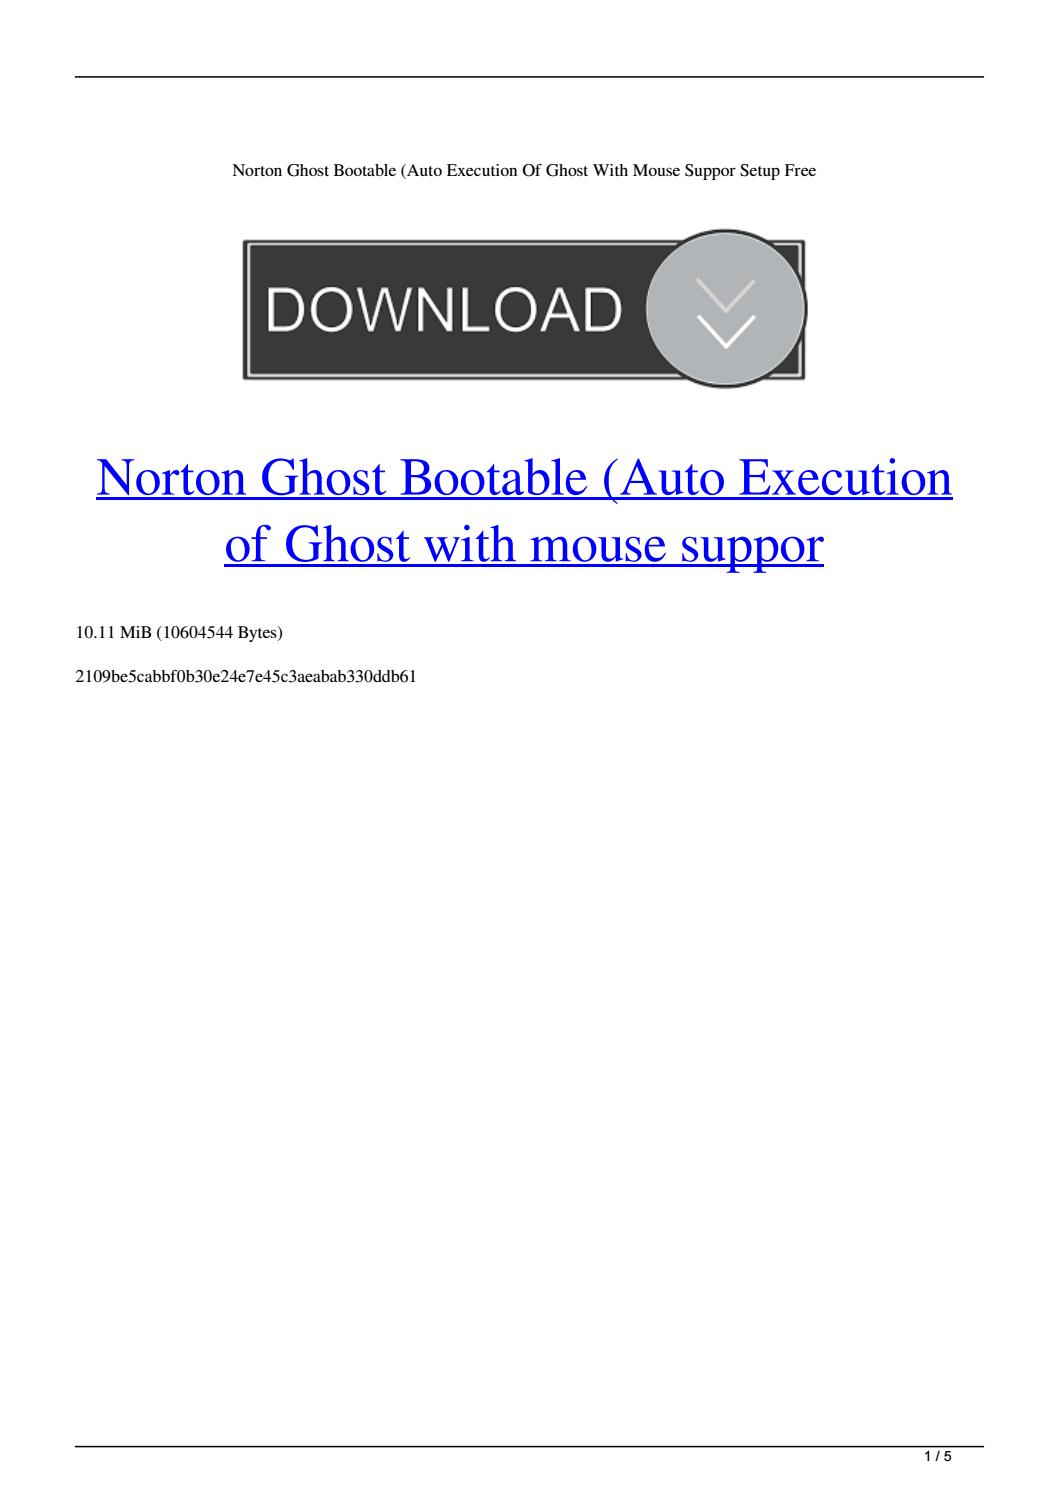 bootable norton ghost download